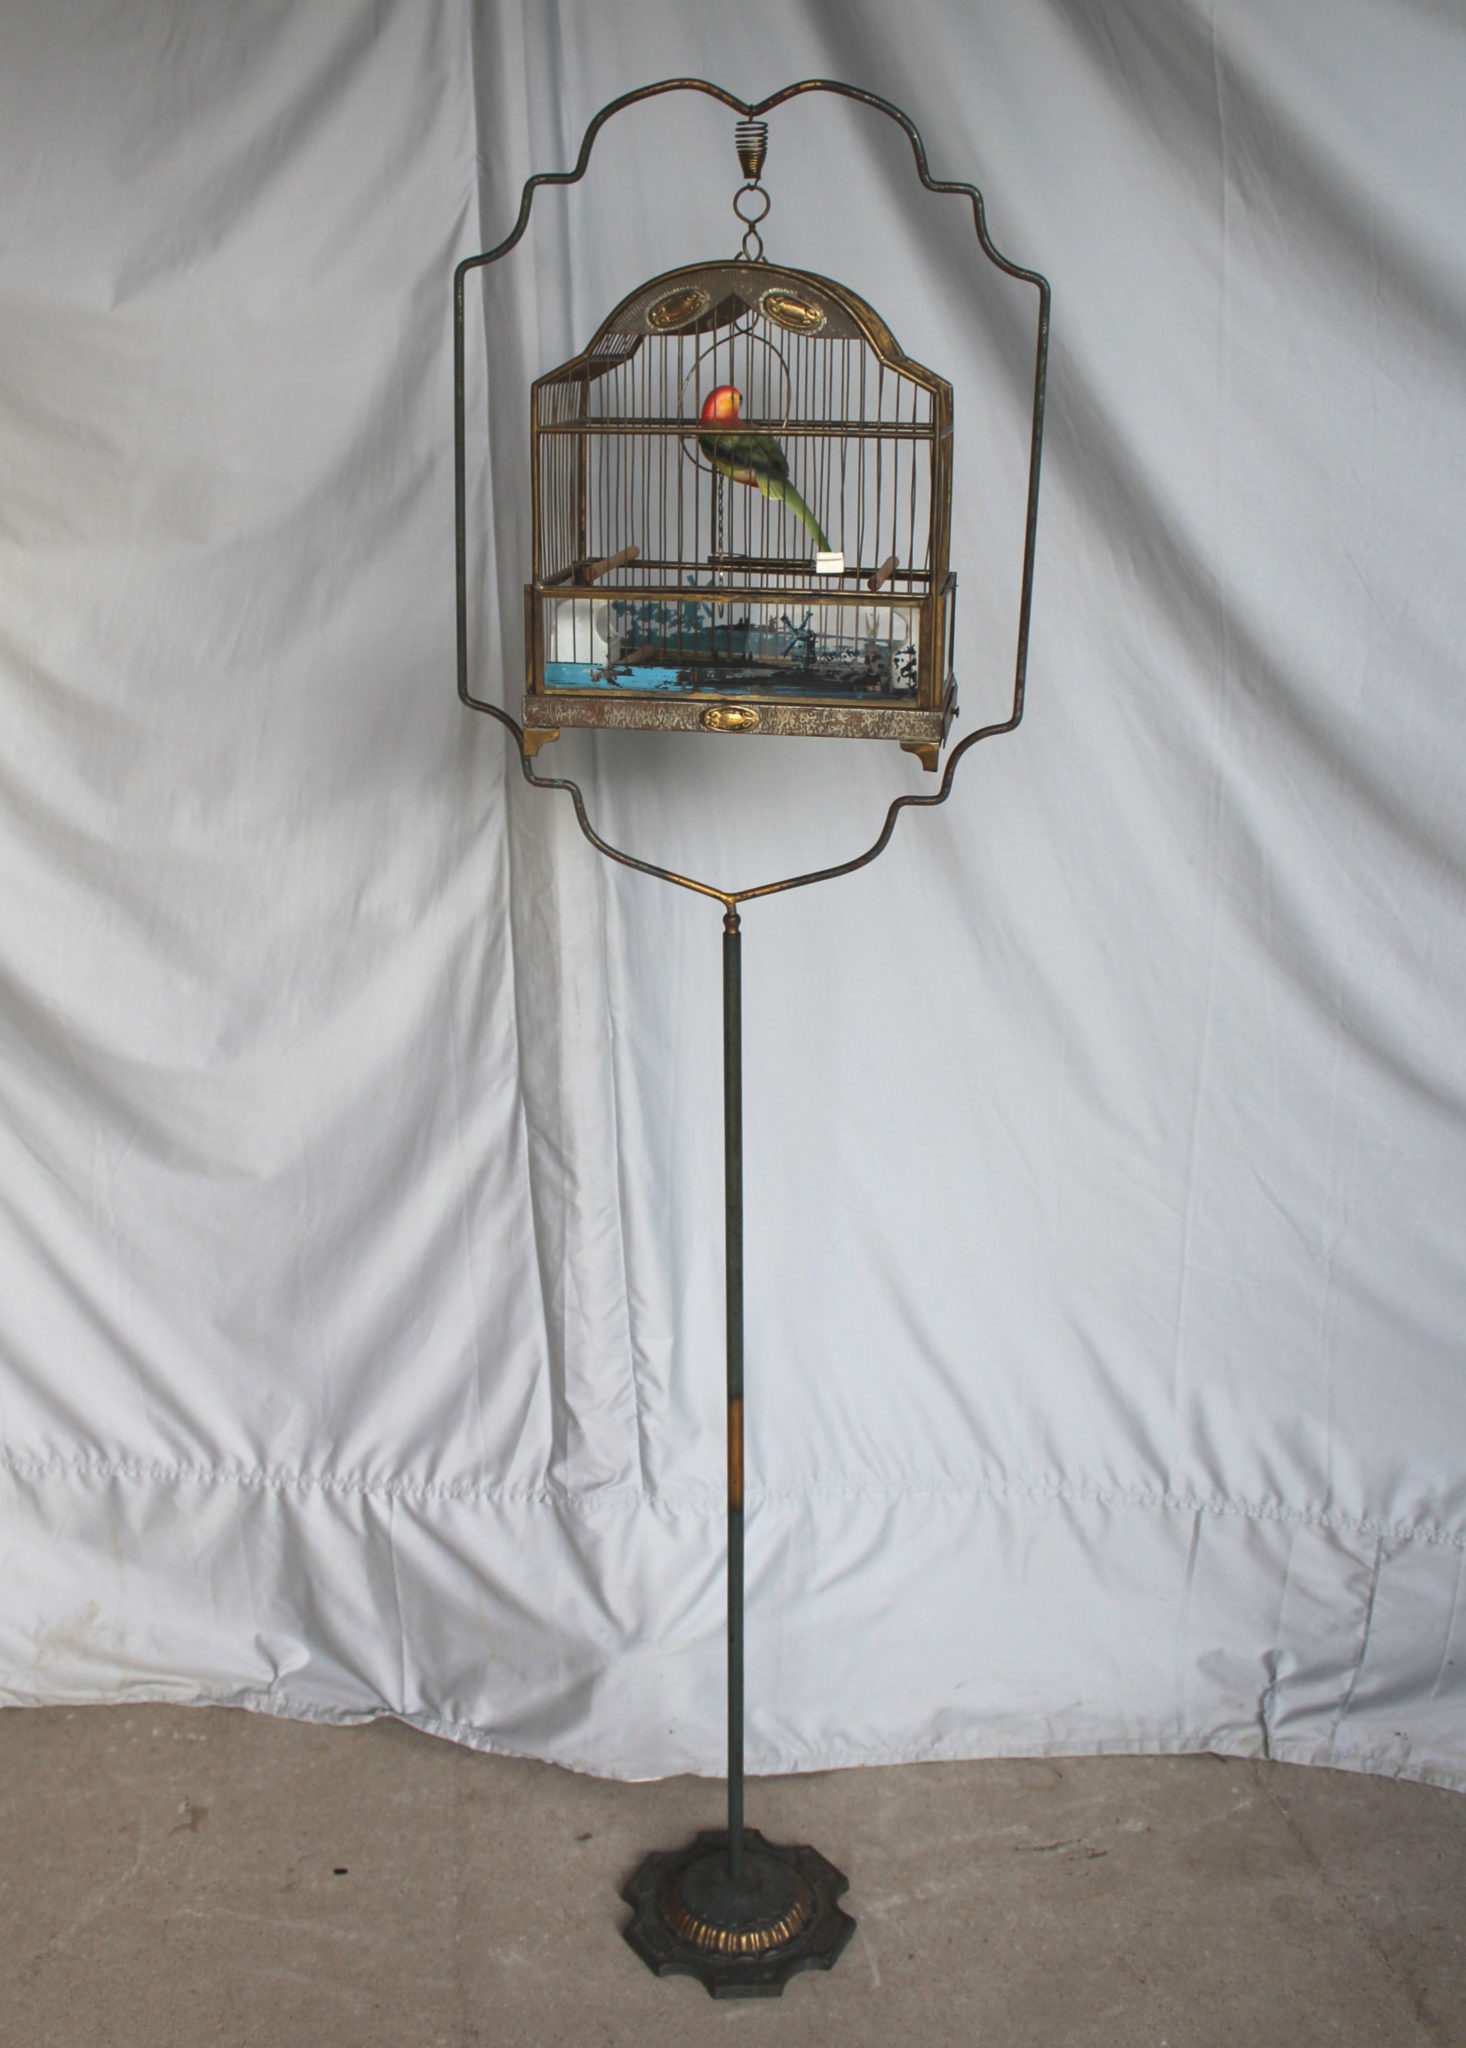 Bargain John's Antiques  Antique Victorian Bird Cage - Floor Model  Complete with Stand - Bargain John's Antiques